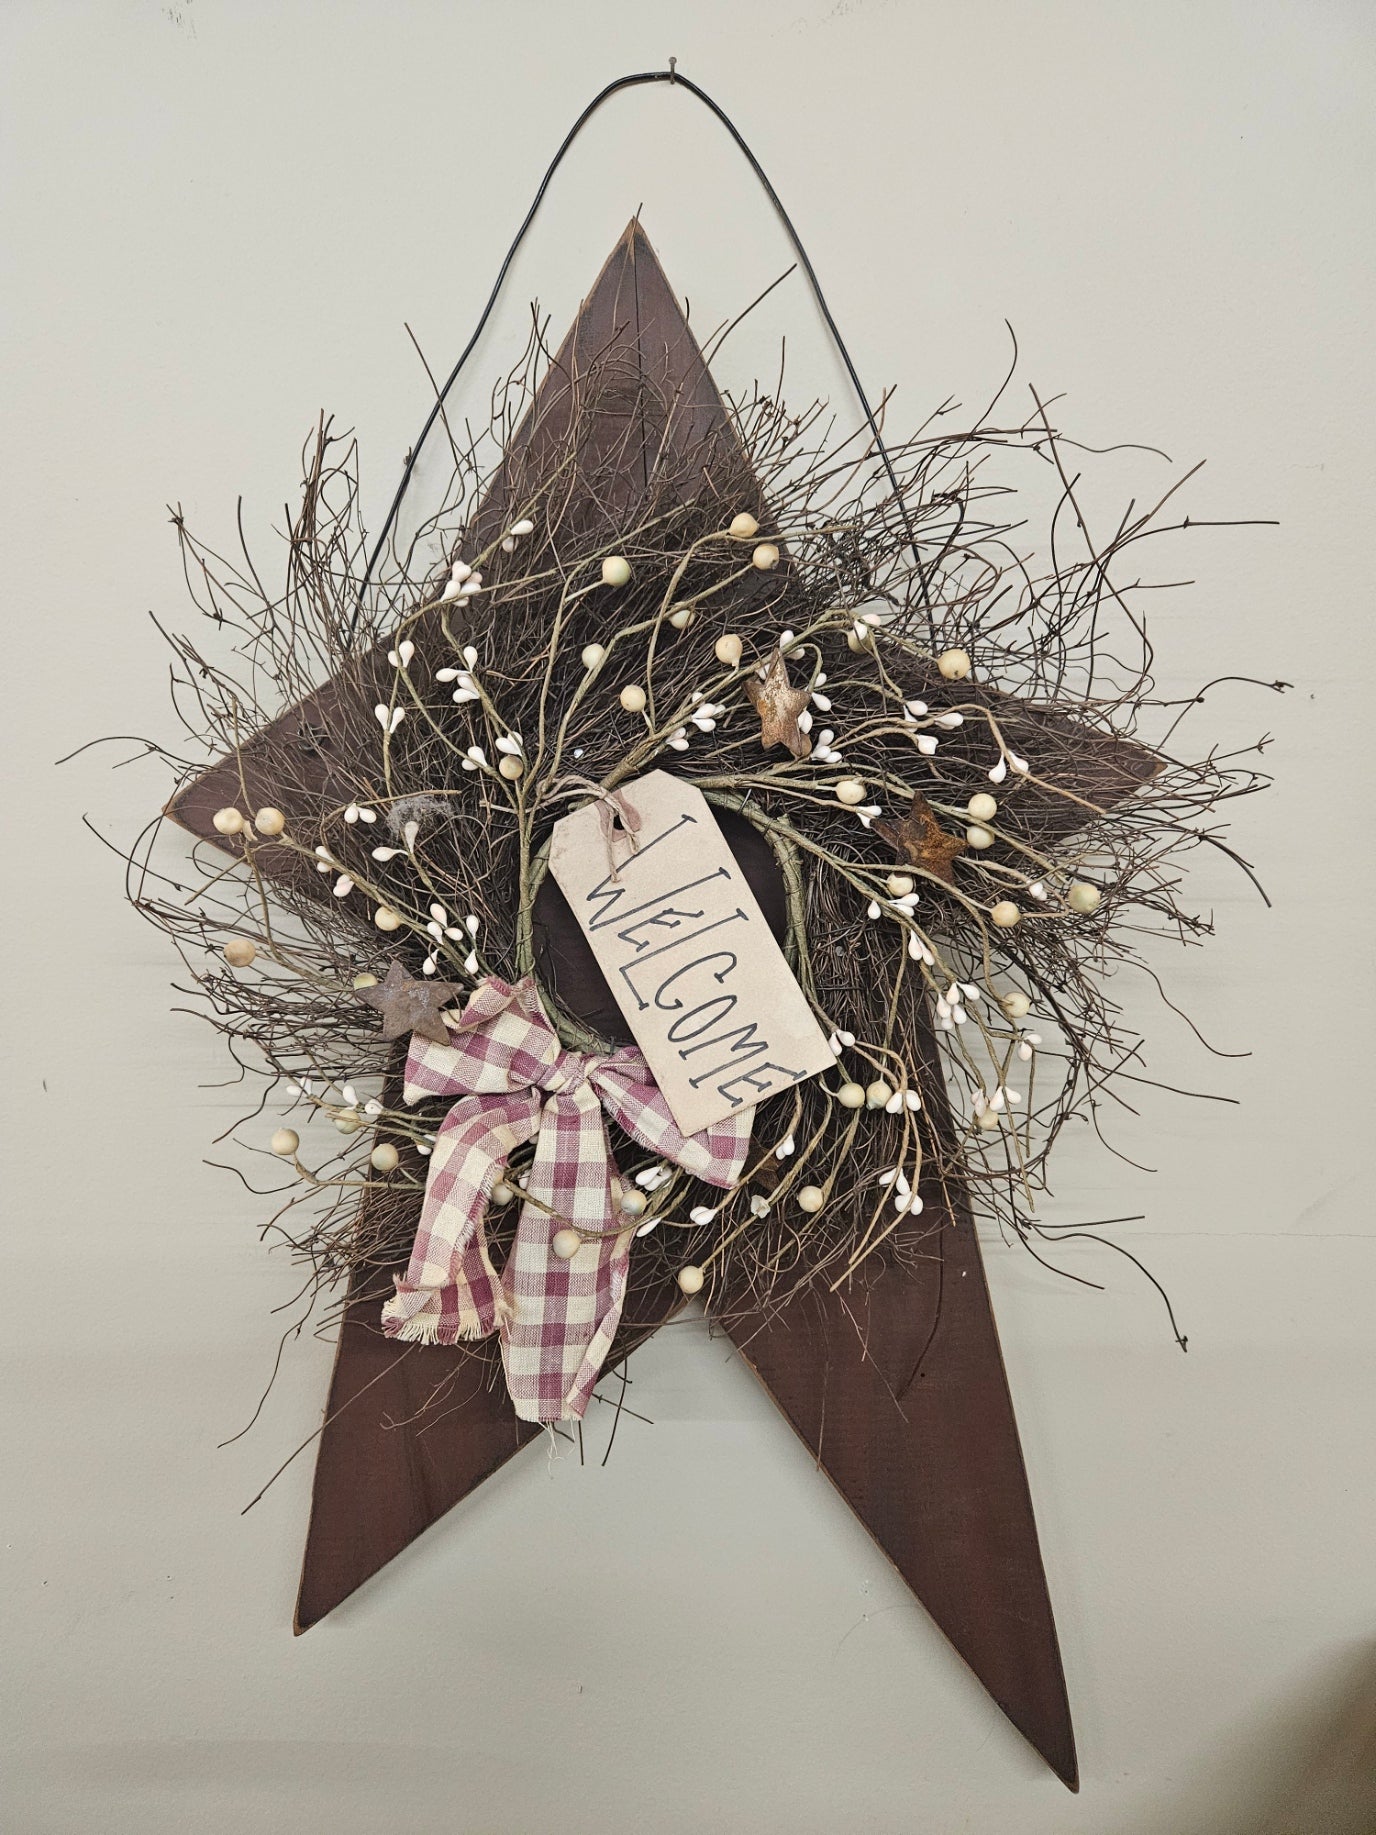 Large, Wood "Welcome" Star